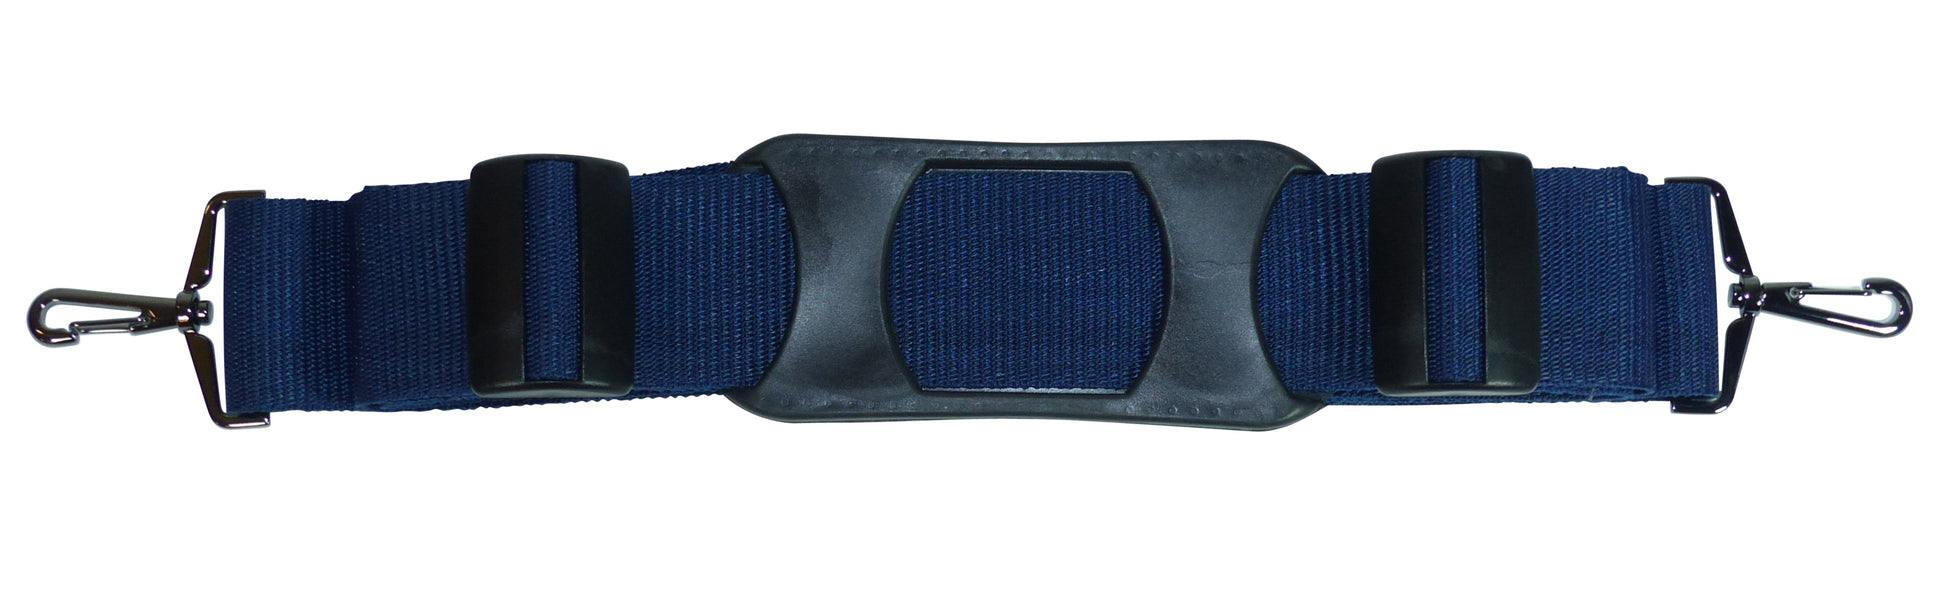 Benristraps 50mm Bag Strap with Metal Buckles and Shoulder Pad, 175cm in navy blue